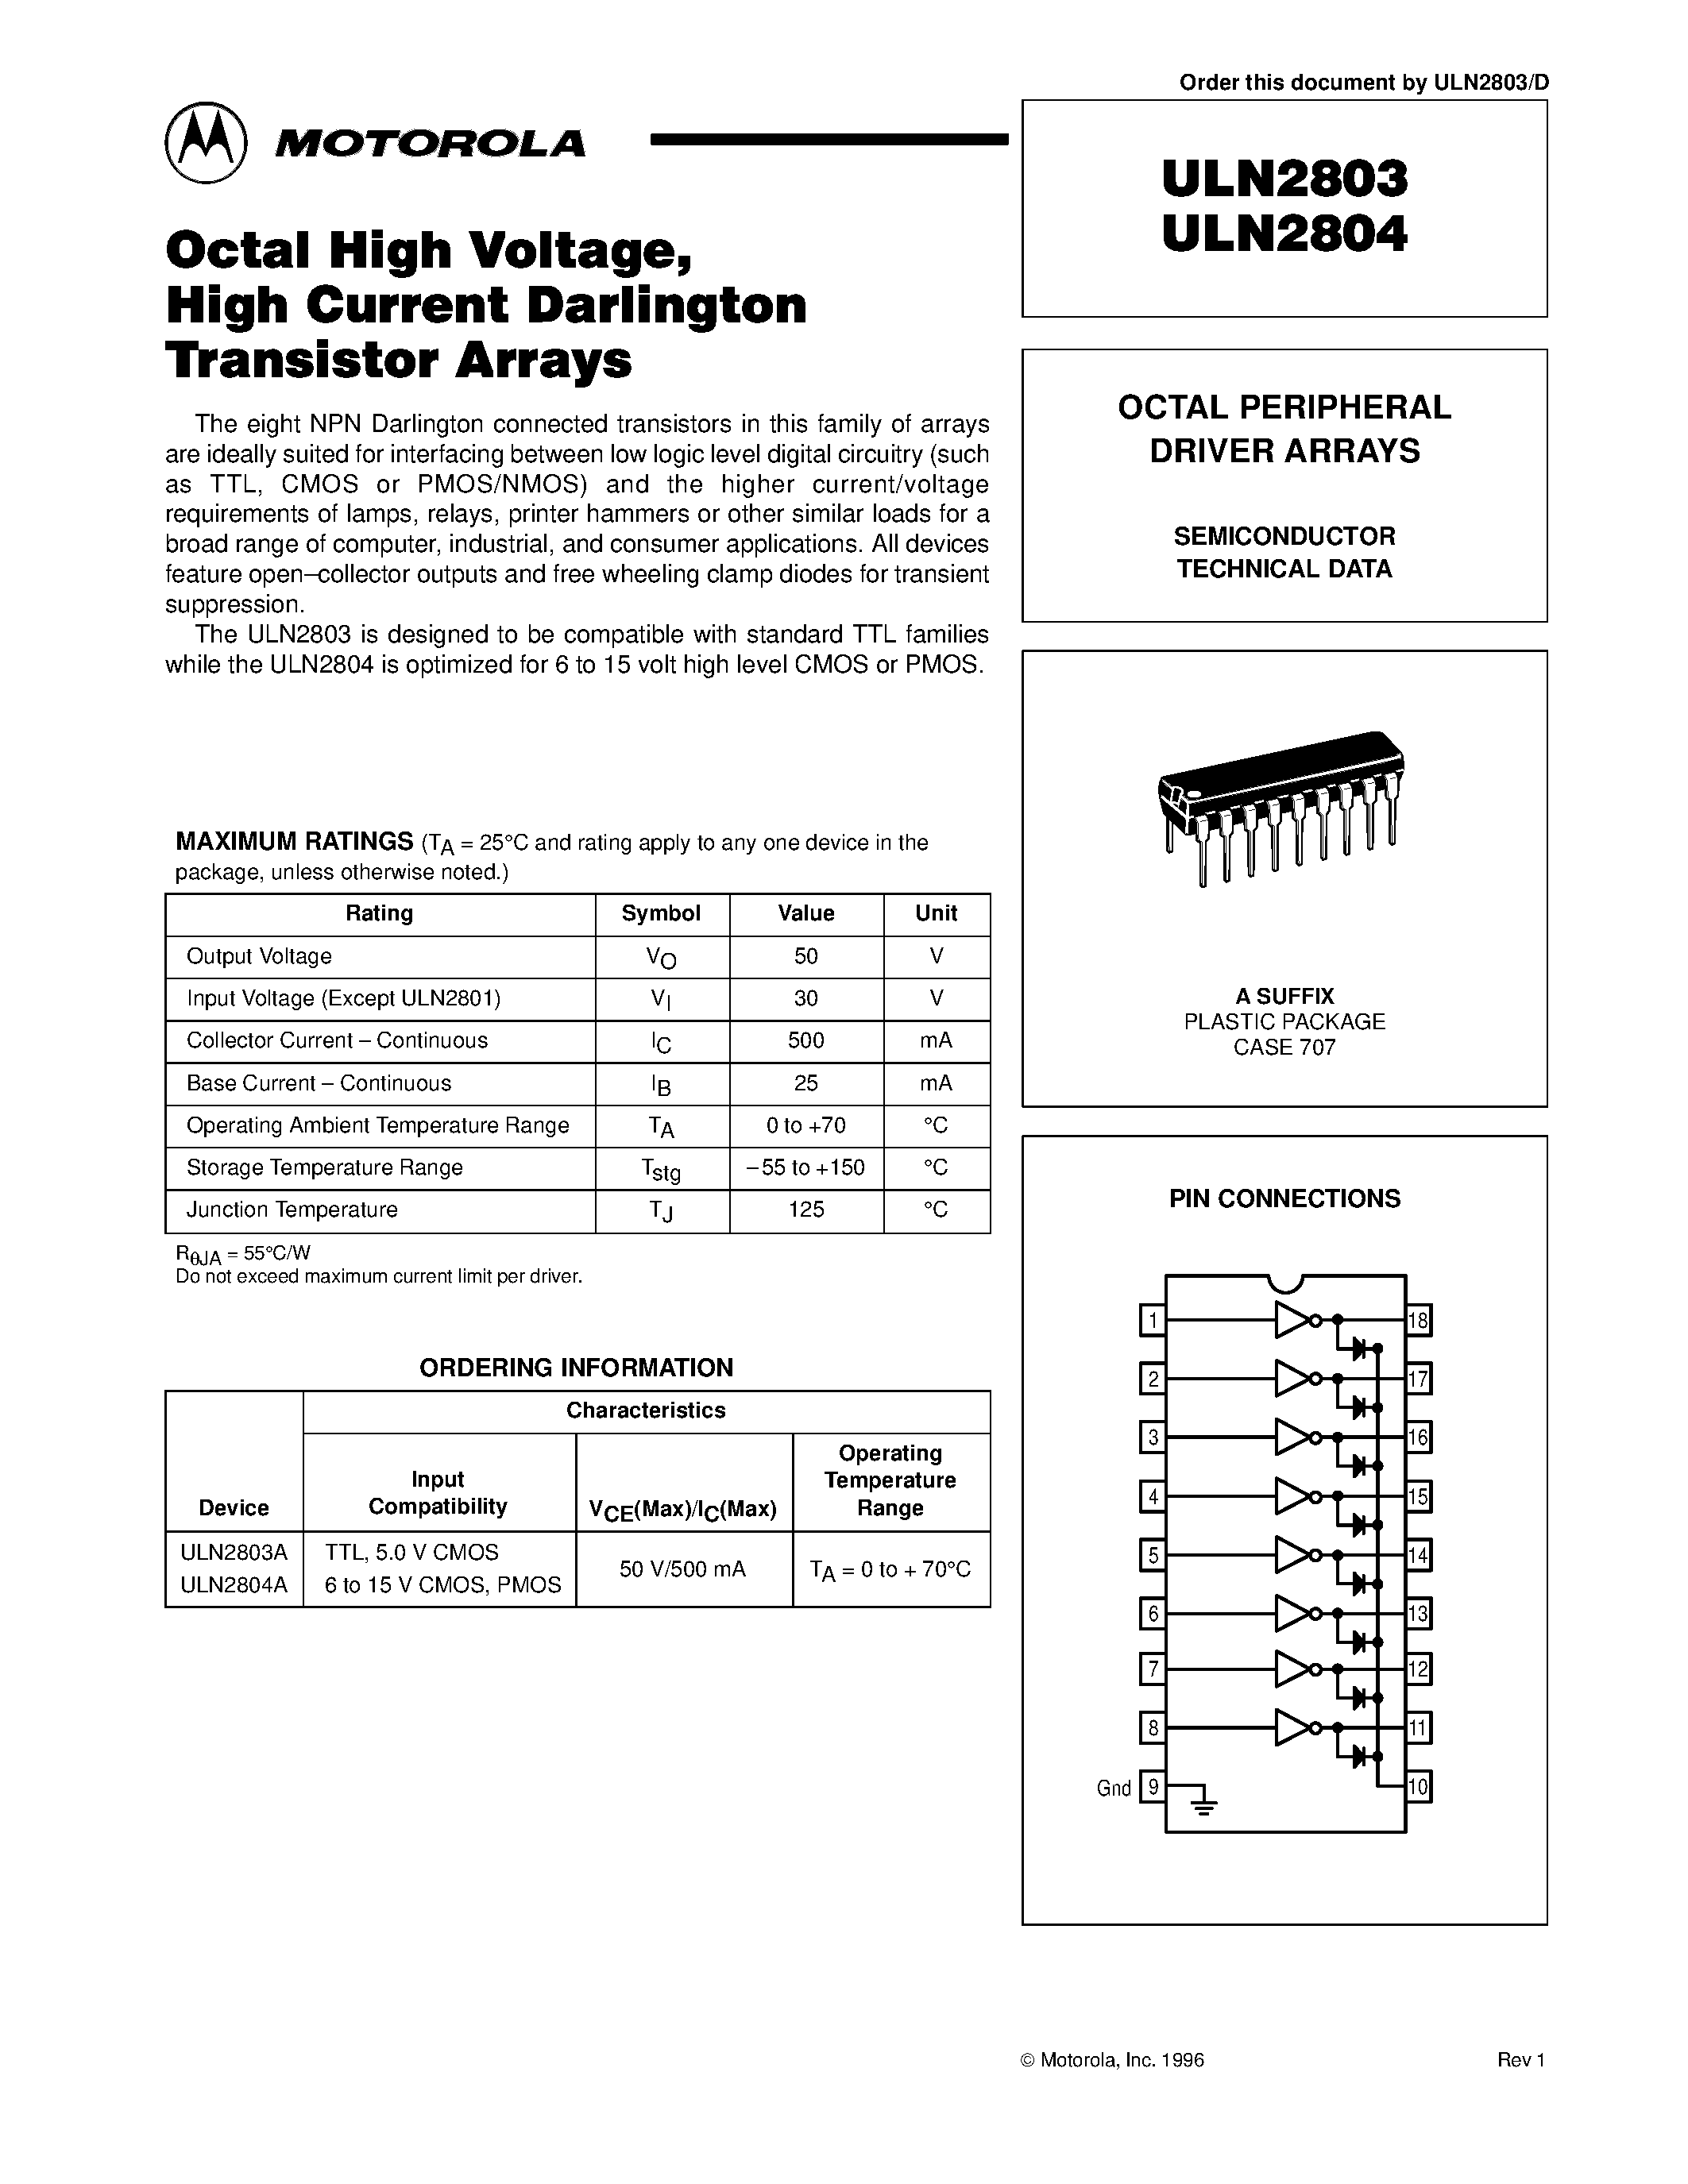 Datasheet ULN2804A - OCTAL PERIPHERAL DRIVER ARRAYS page 1